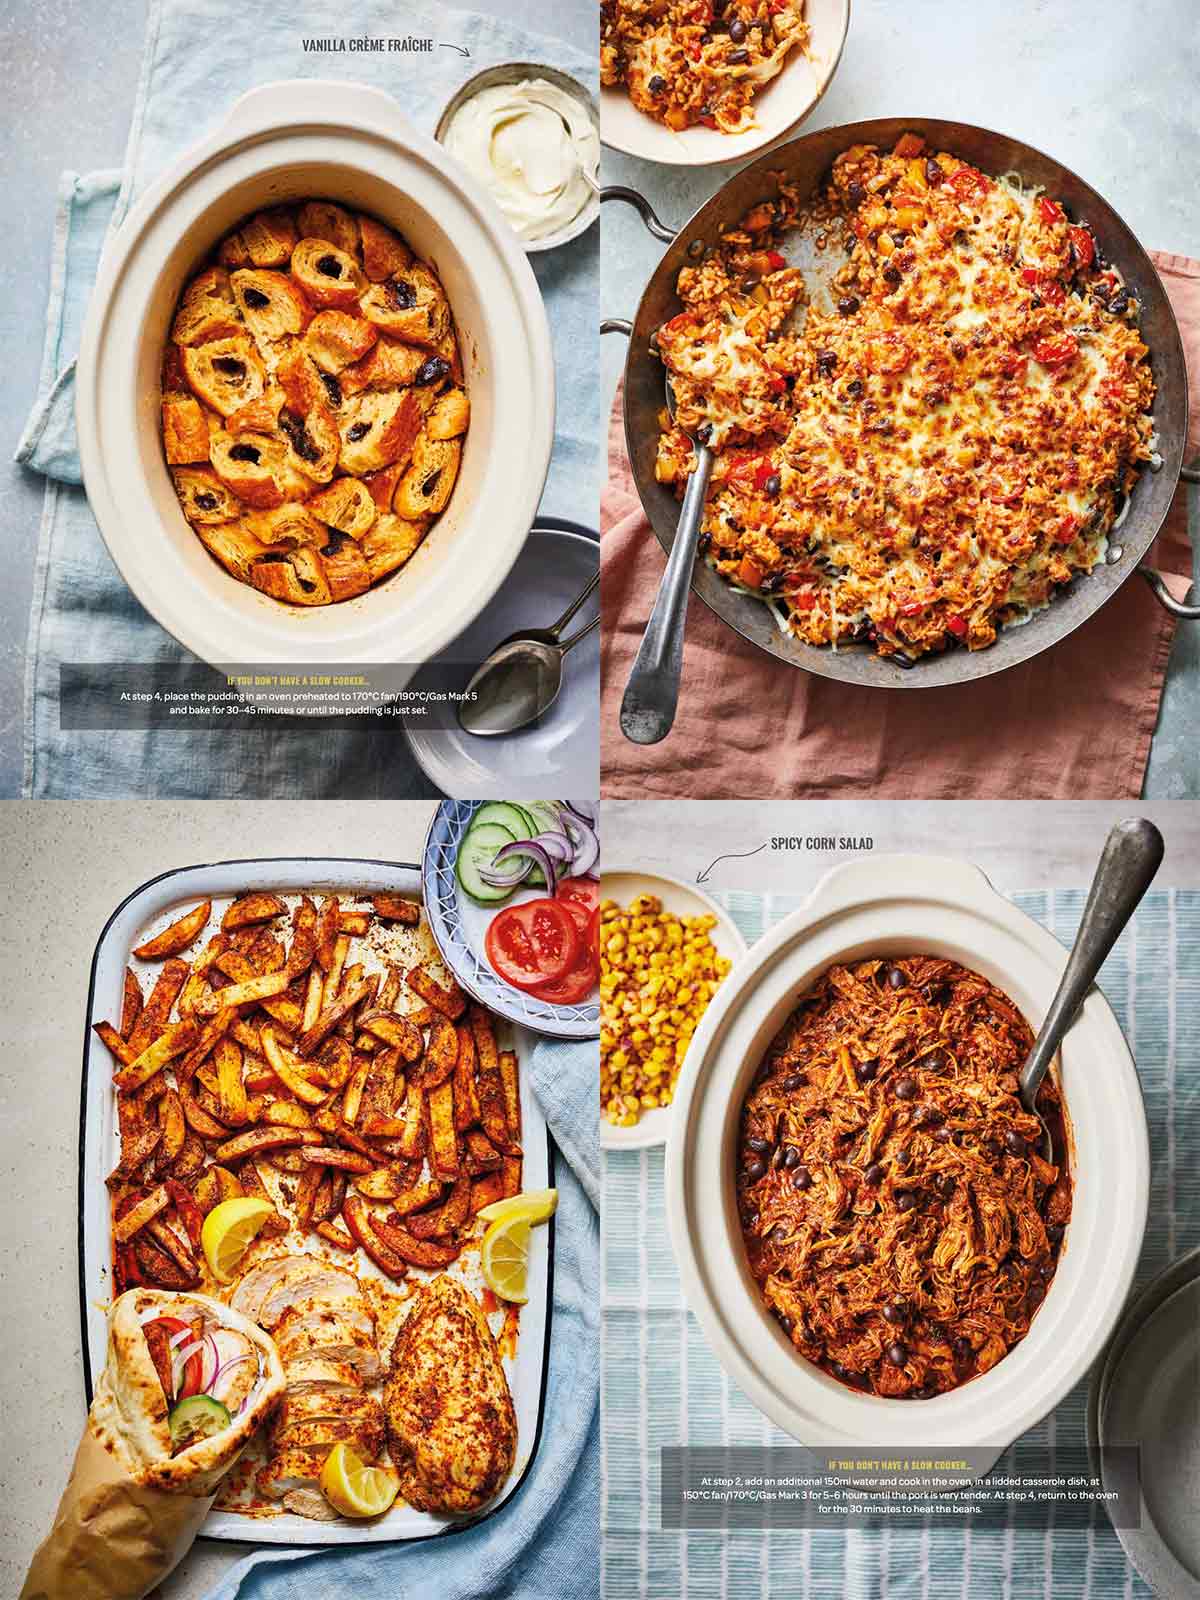 Collage of recipes from What's for Dinner by Sarah Rossi.